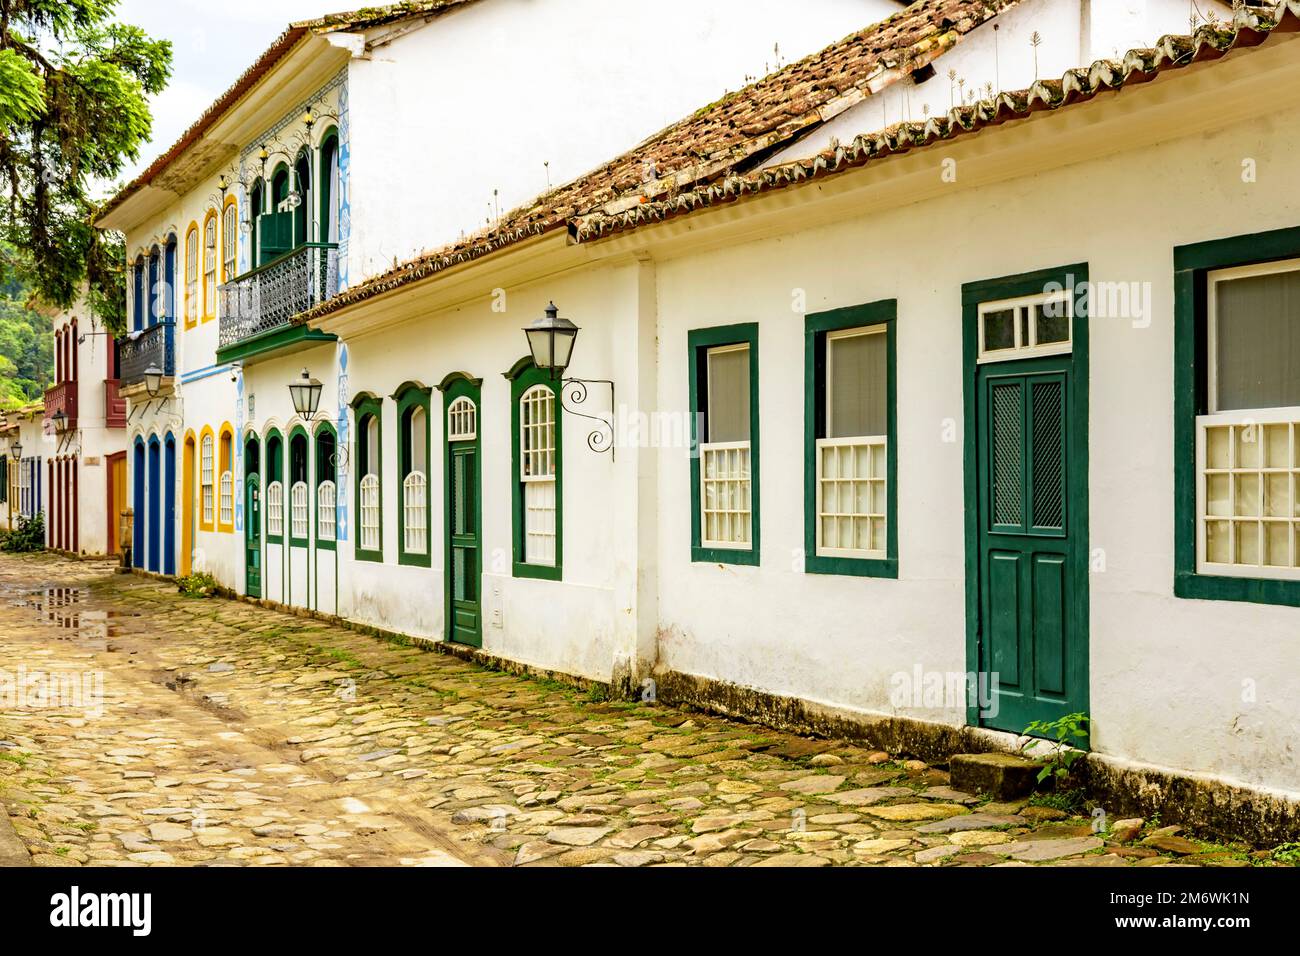 Bucolic street with cobblestones and historic colonial-style houses in the city of Paraty Stock Photo